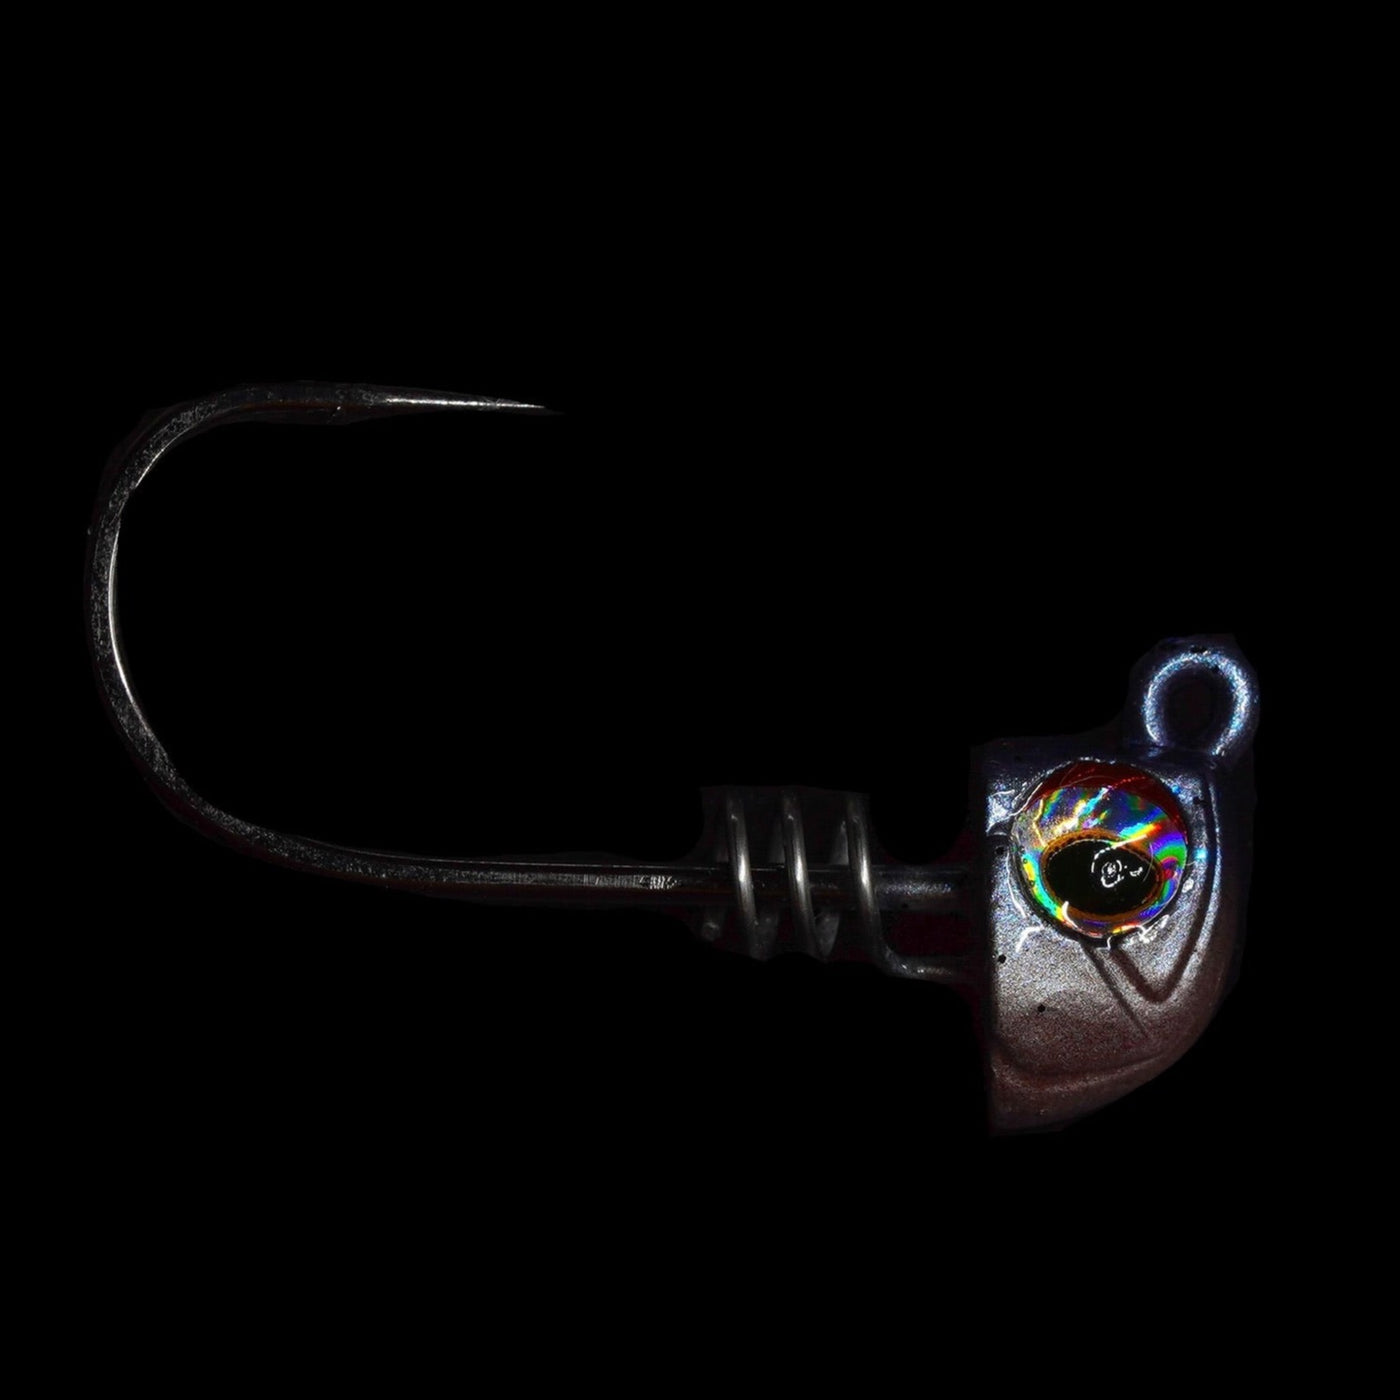 Jig Heads for 3" bait - No Live Bait Needed Jig heads3 3